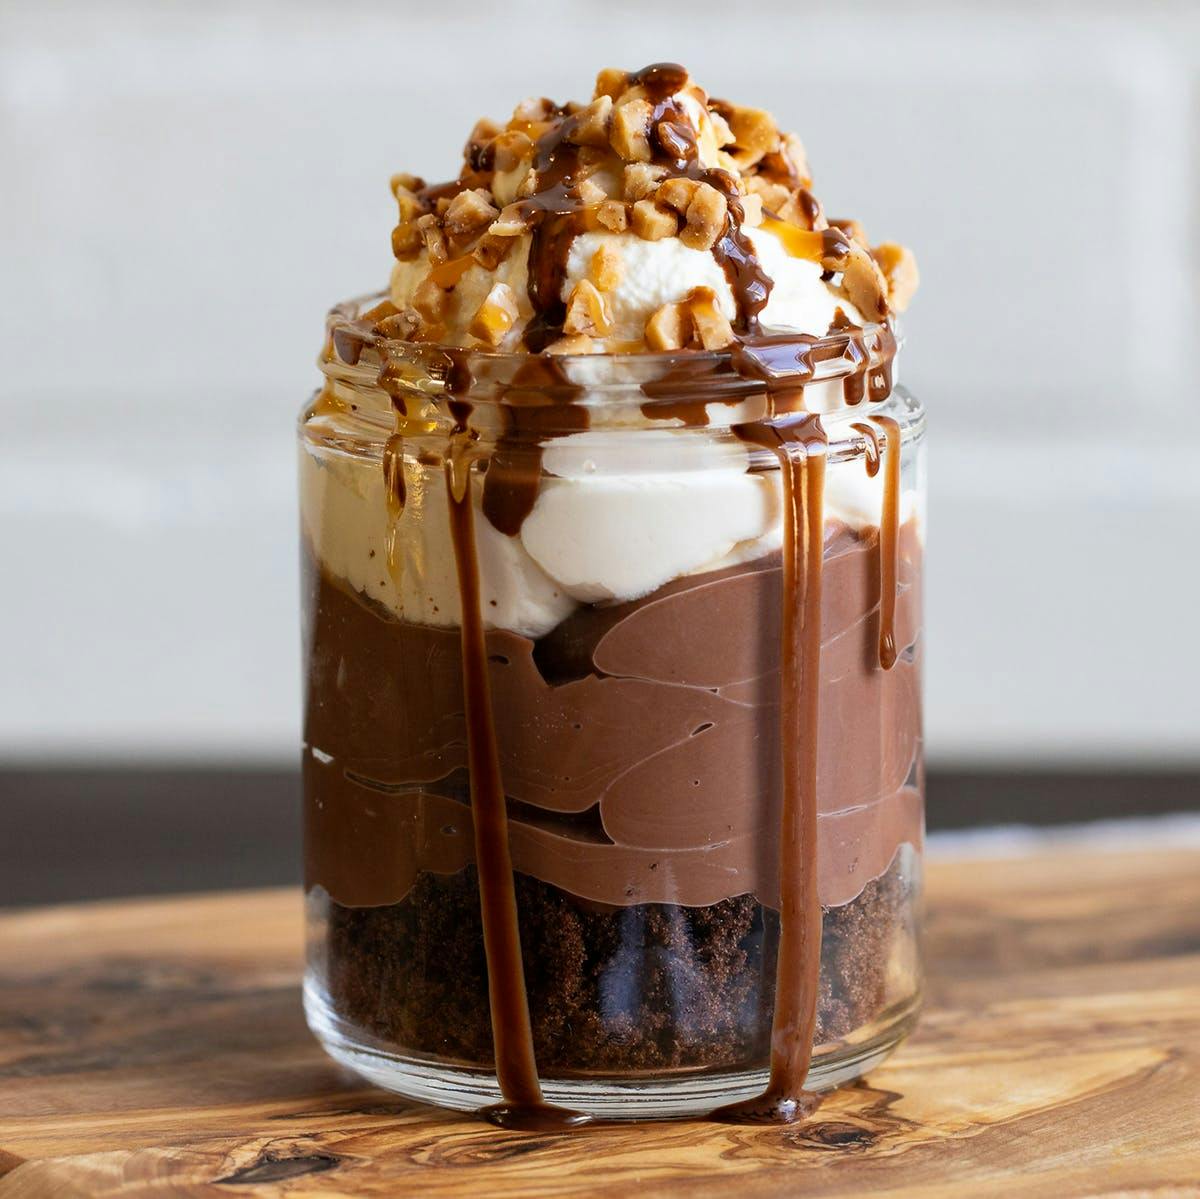 Chocolate Awesome Pudding Jars 6 Pack by 4 Rivers